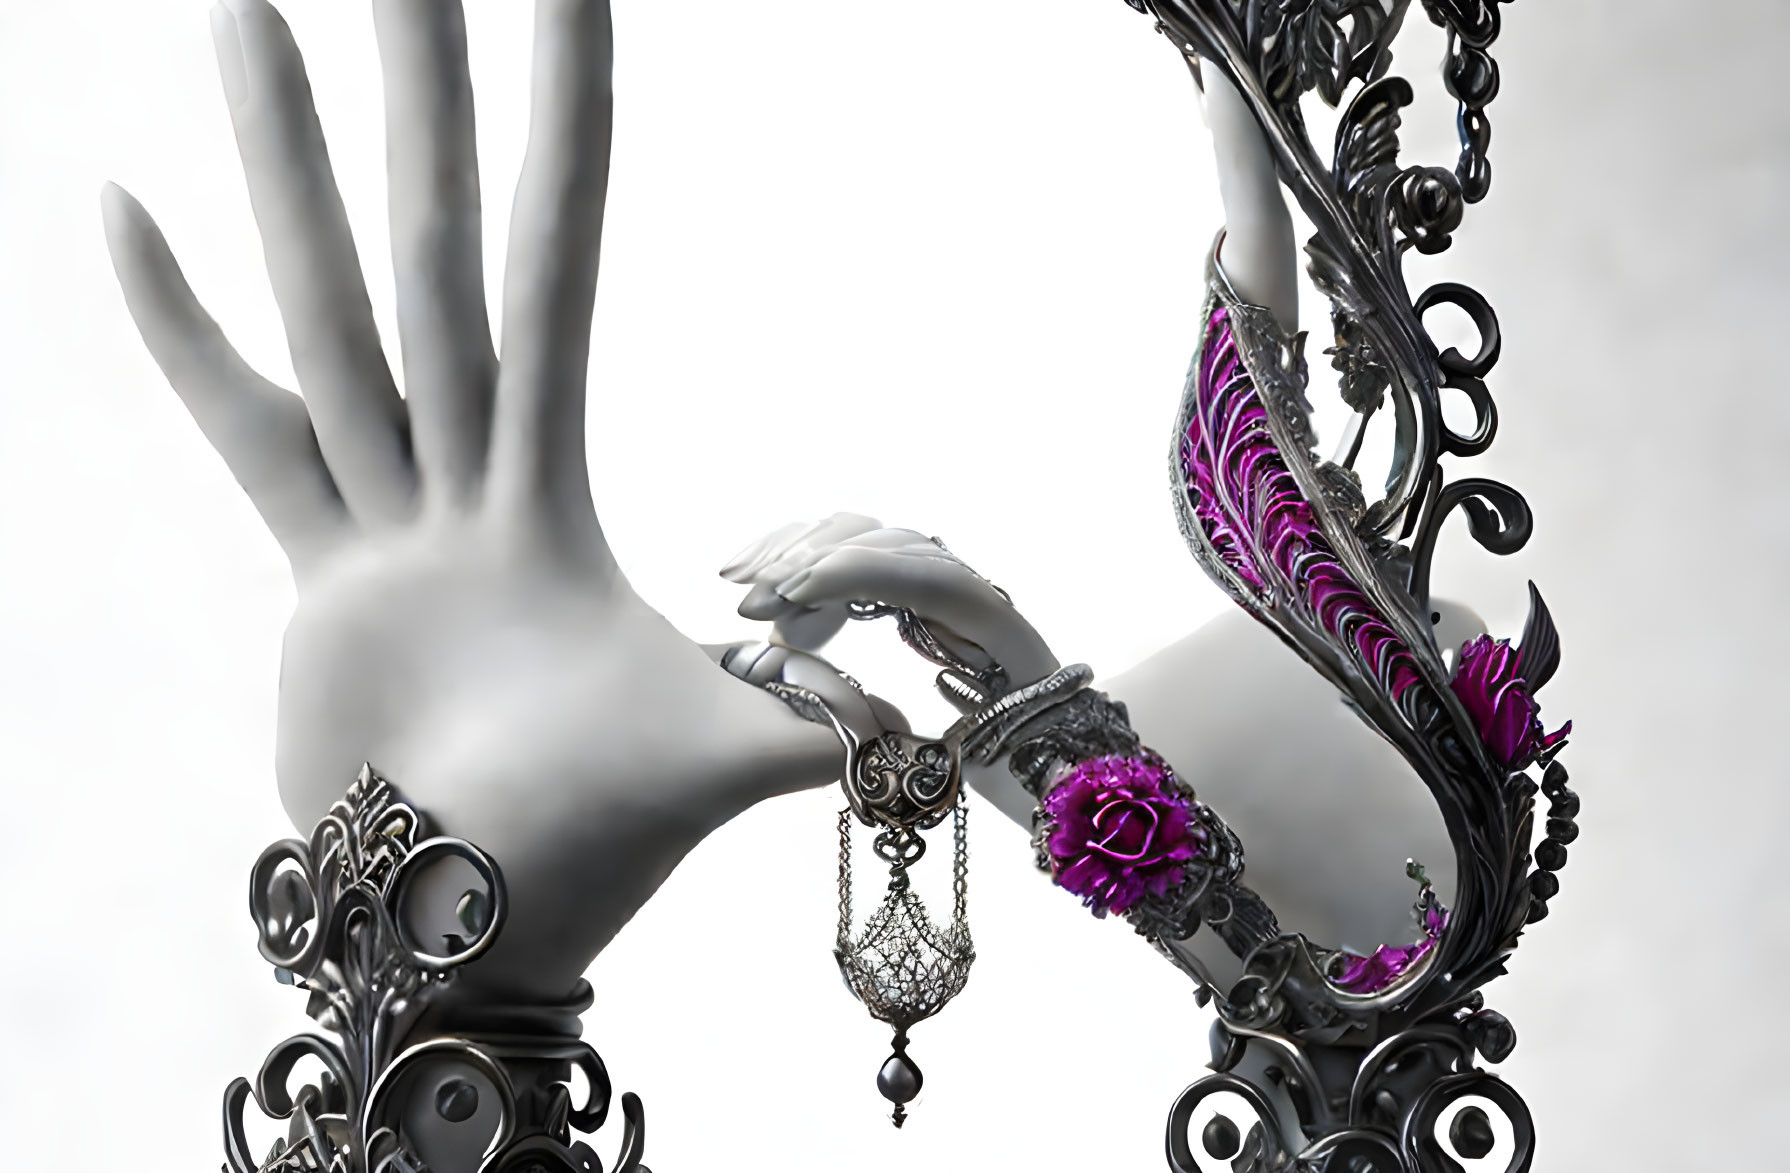 Baroque-style cuffs connecting two hands with a purple rose